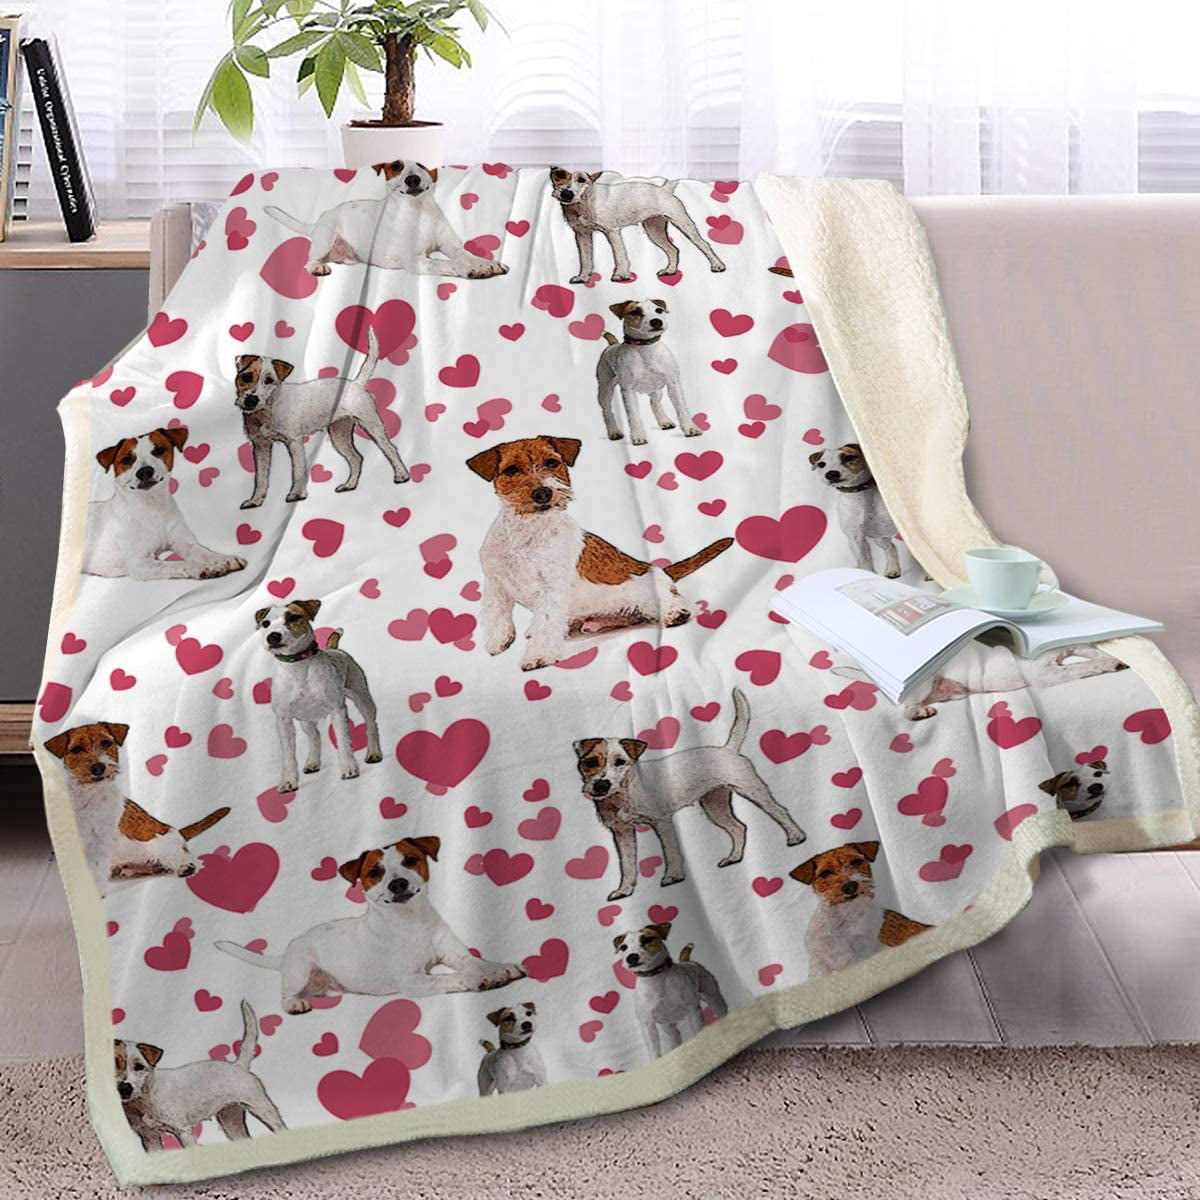 Throw, 50 x 60 Inches BlessLiving Shih Tzu Blanket Red Hearts Dog Fleece Plush Blanket Cute Puppy for Kids Adults 3D Animal Print Sherpa Blanket Gift for Pet Lovers 